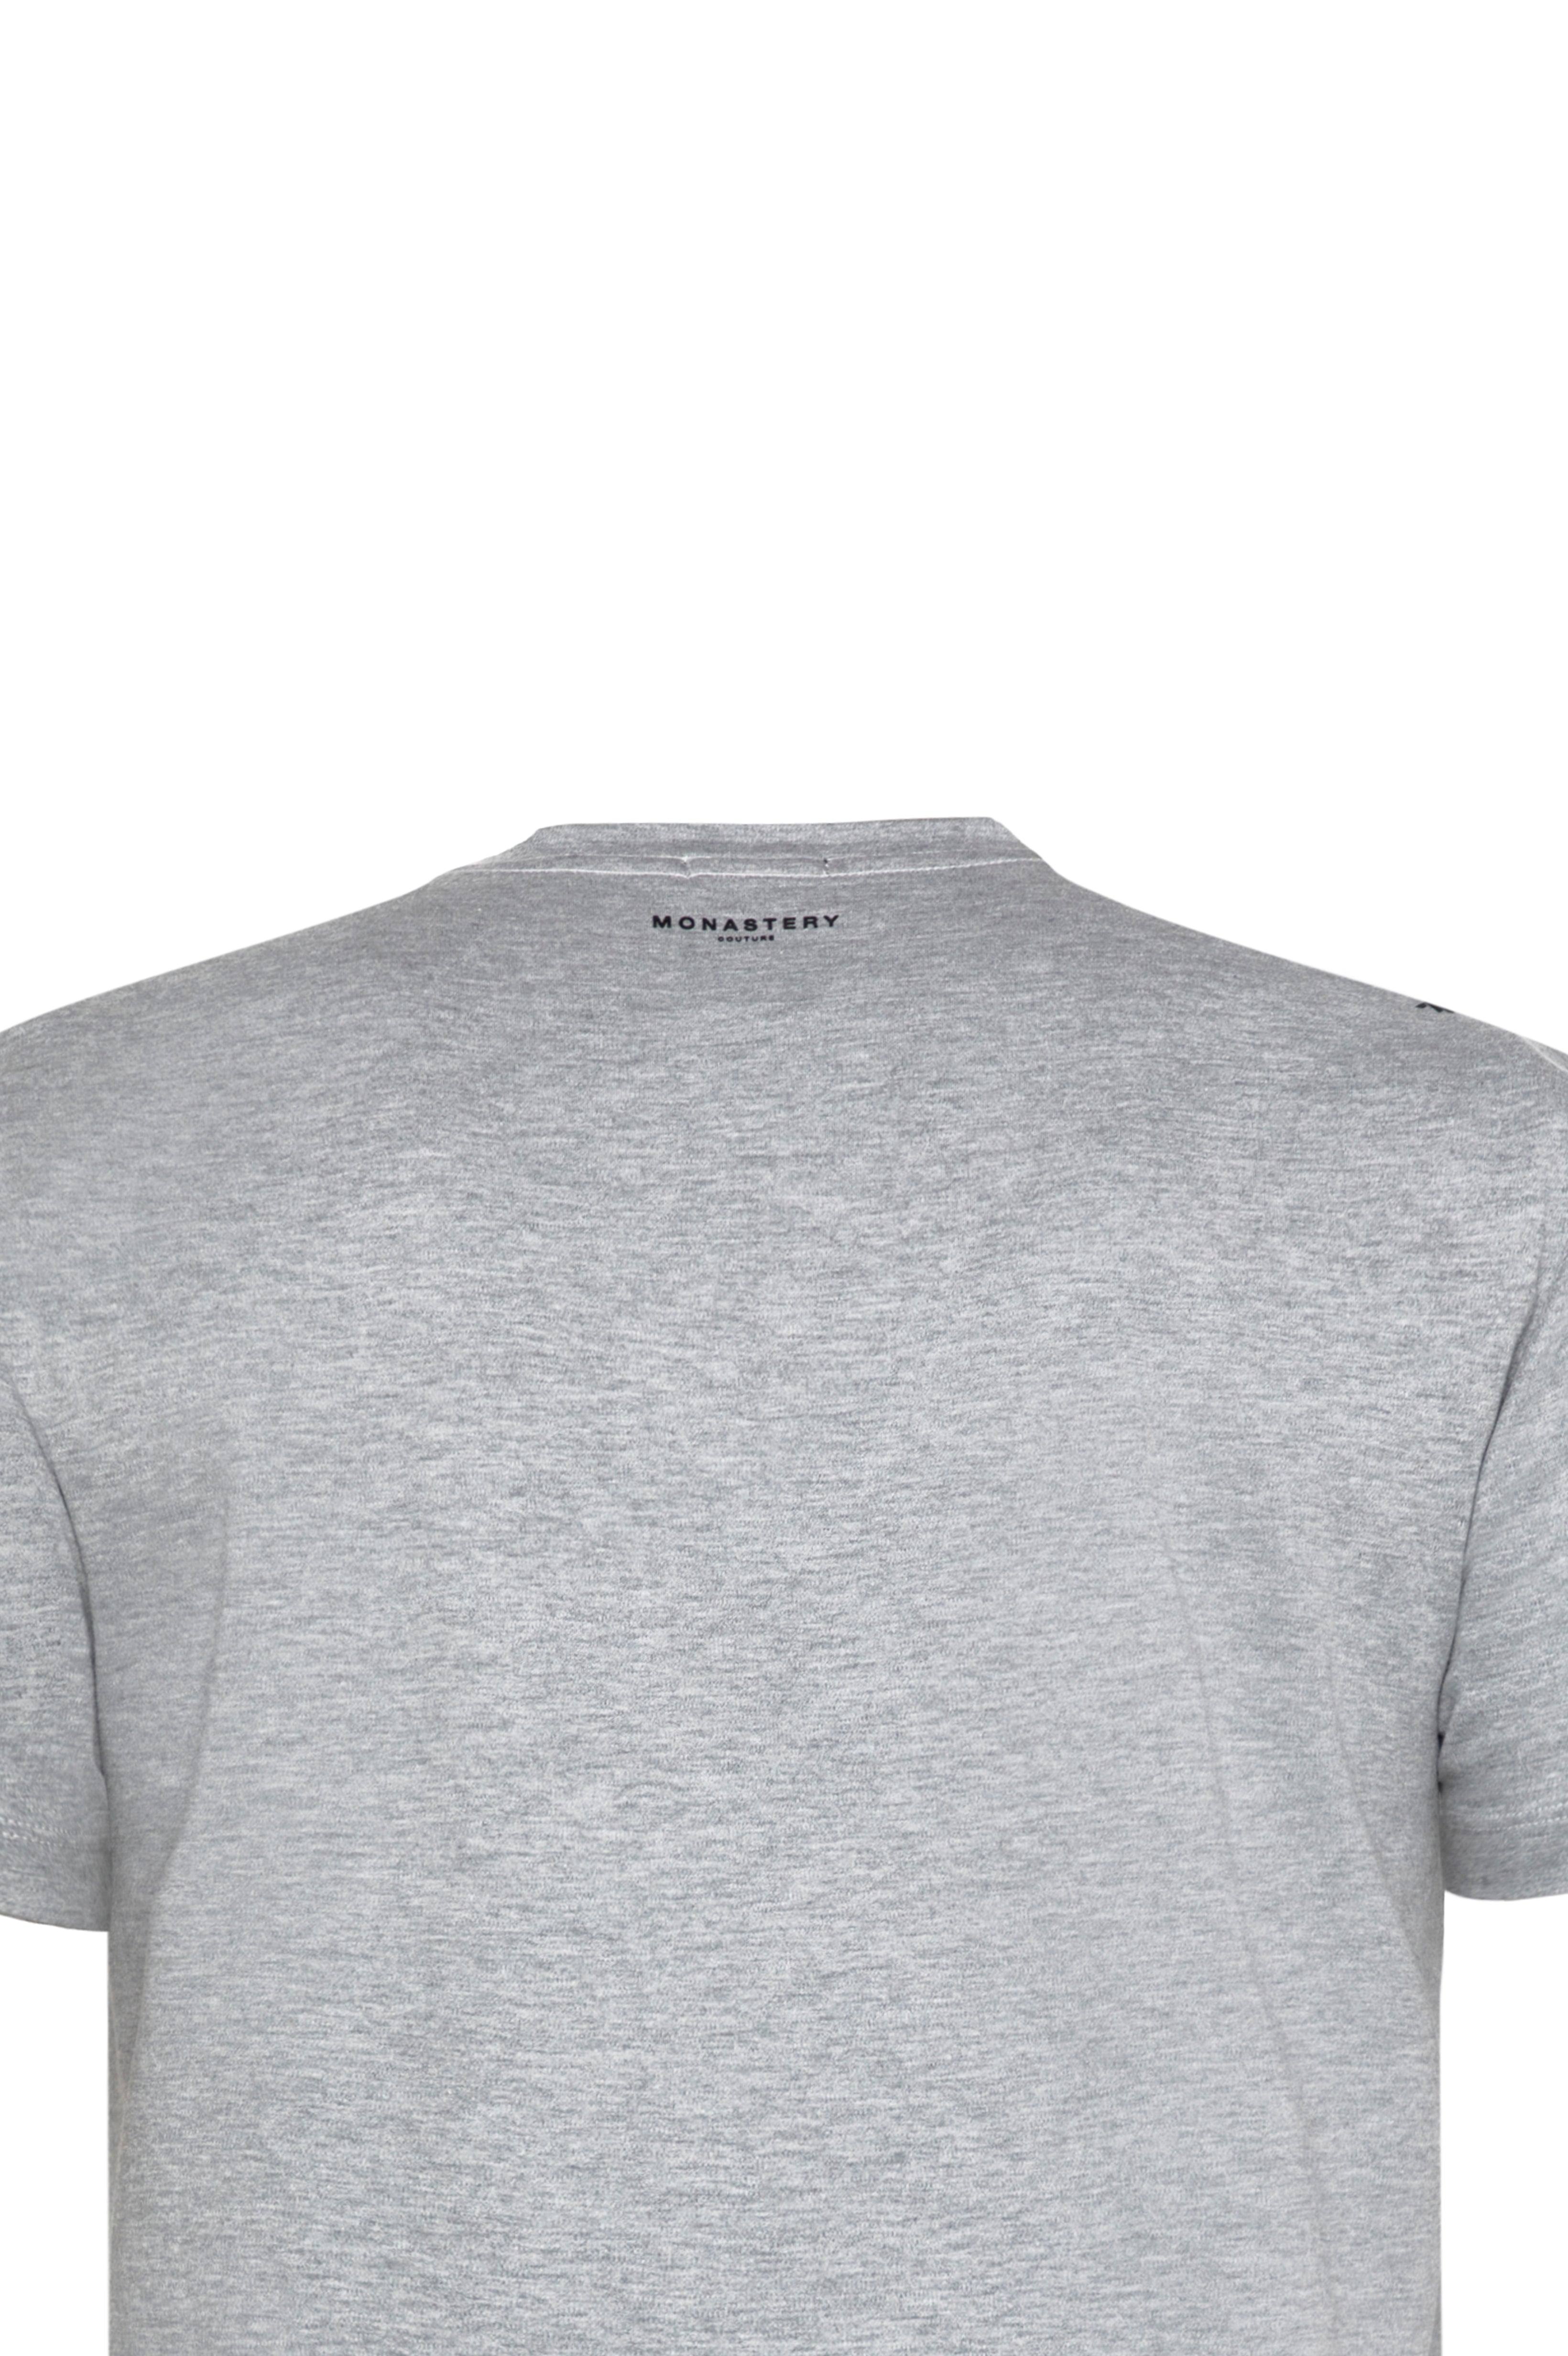 MADISON T-SHIRT JASPED GREY | Monastery Couture